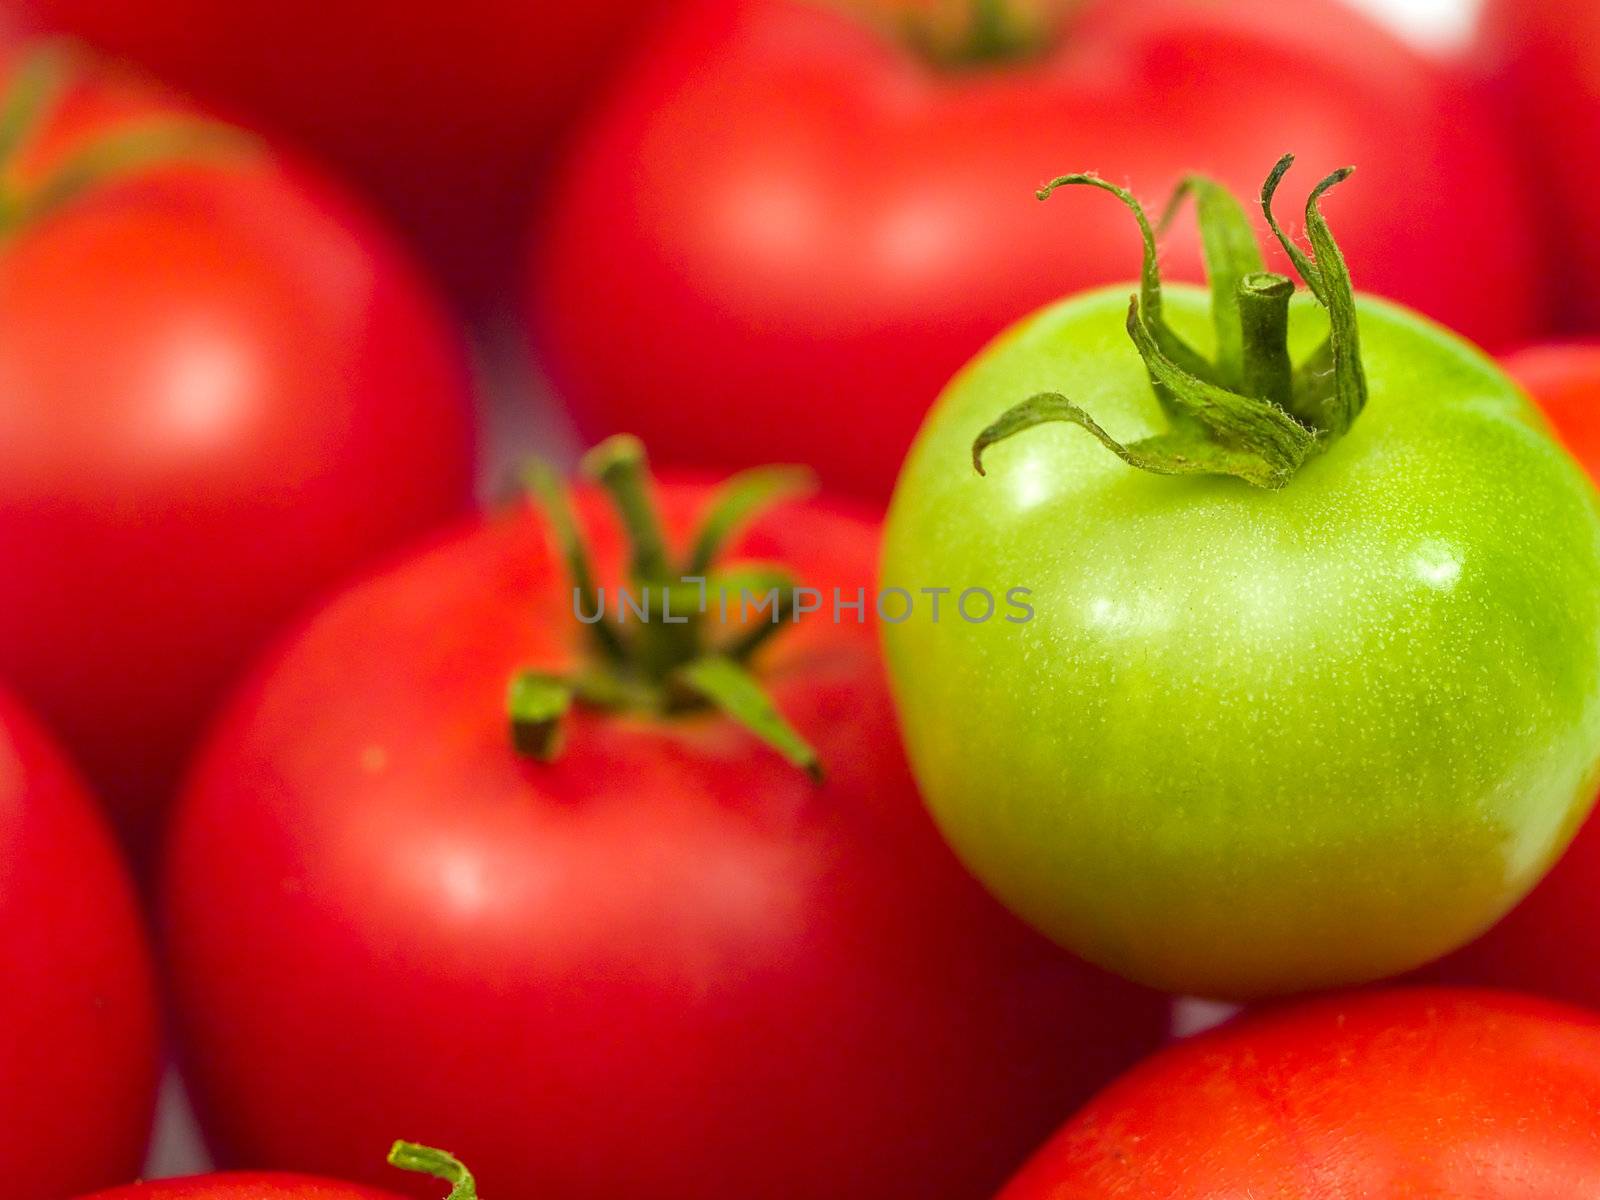 A Background of Red Ripe Tomatoes and One Green Tomato